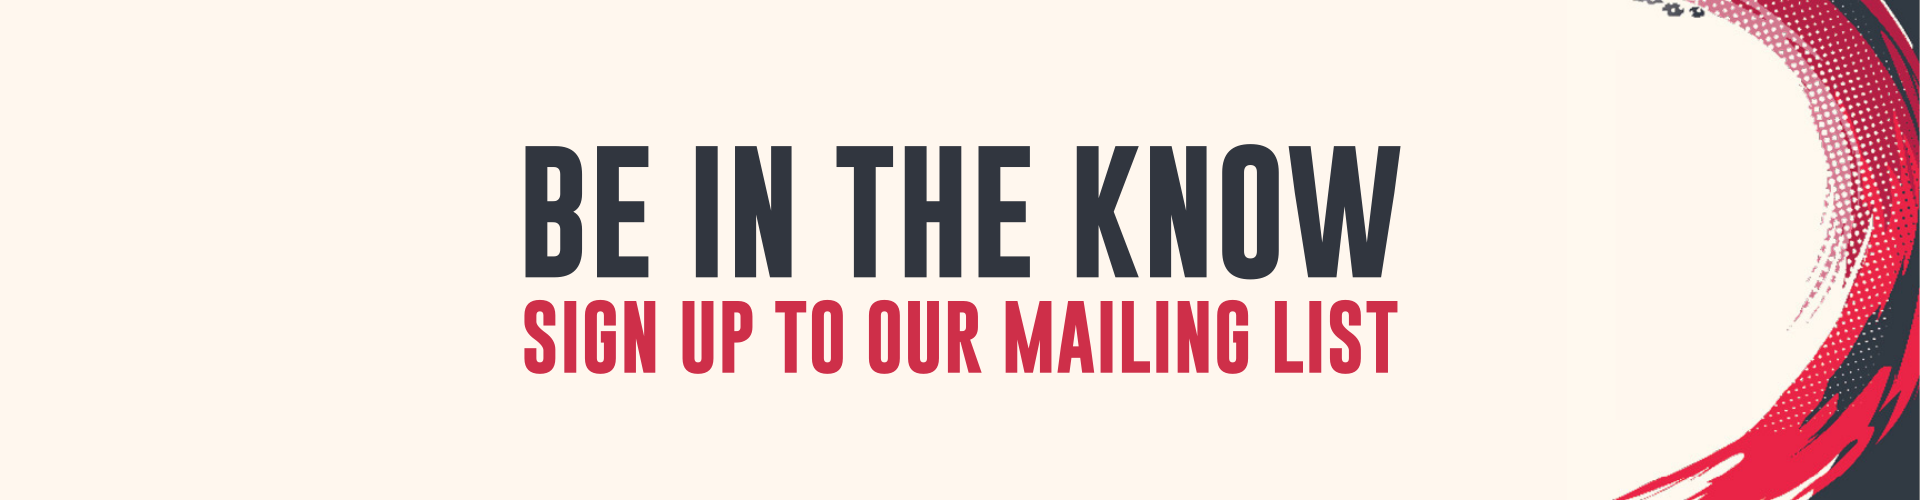 Be in the know - sign up to our mailing list